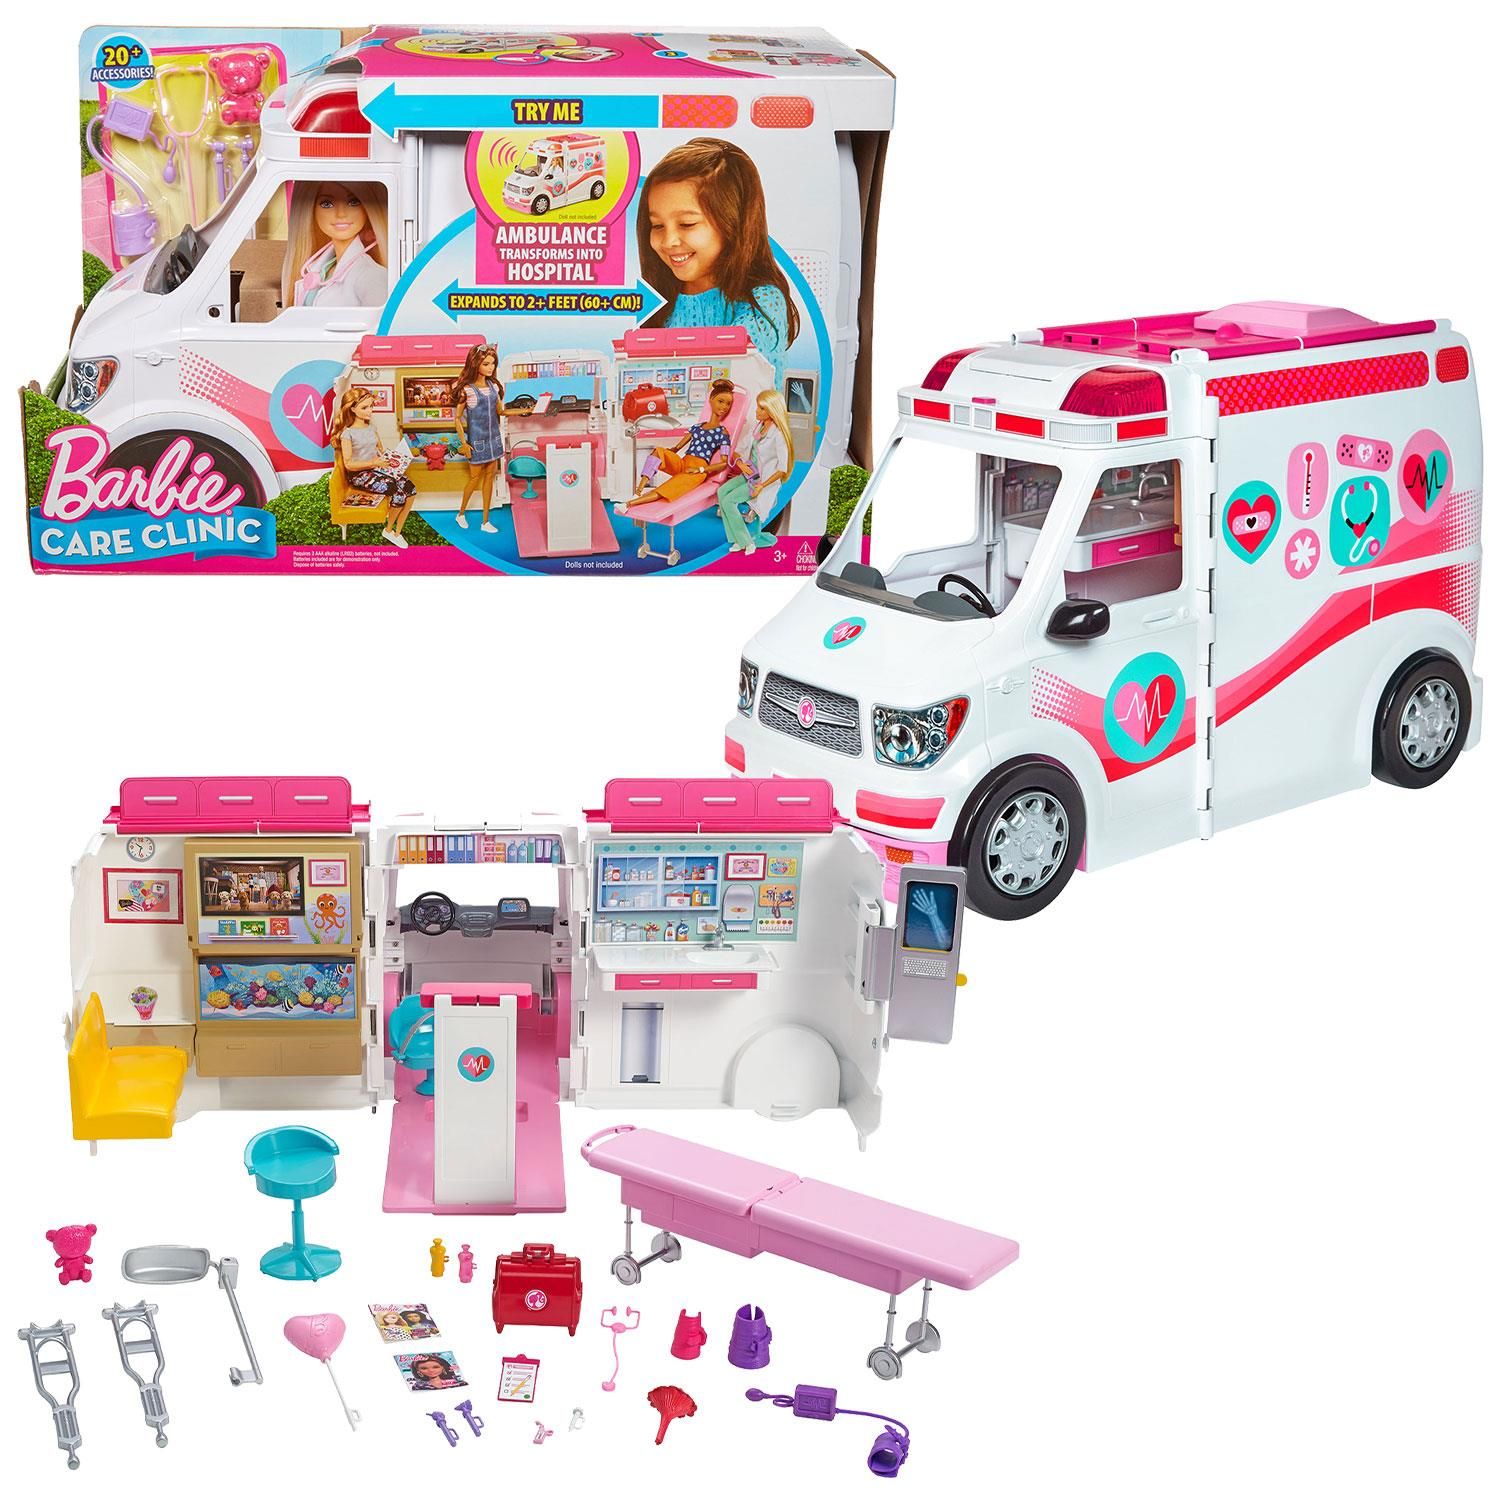 Barbie Career Care Clinic Ambulance with Accessories, Great Gift for Kids

Drive playtime fun with the Barbie care clinic. This 2-in-1 rescue vehicle is both an ambulance, with working siren sounds and lights, and a 2 ft long hospital with more than 20 themed pieces that inspire nurturing doctor role-play. With a lift of the lever, the colourful emergency car transforms into a care clinic, fully equipped for medical assistance and check-ups. The playset features three distinct play spaces: A check-in station with a pop-up reception desk, a waiting room with a hidden gift shop, and an examination room with an x-ray machine that doubles as a vision chart. Among the additional accessories (some with handles), there is diagnostic equipment like a stethoscope and blood pressure cuff, medical supplies like casts and crutches, waiting room magazines as well as gift shop items. It is the ideal gift for aspiring doctors. With this set, you can explore all types of medical professions from nurses to physicians, and help people feel better, just like Barbie. Doll not included.

Features:

Barbie care clinic vehicle inspires endless storytelling play for young aspiring doctors
The playset can be easily transformed from a rolling ambulance to a fully equipped hospital on wheels
Features a three-room hospital setting: check-in stand with a swivel chair; waiting room with couch, fish tank, and gift shop; exam room with an x-ray machine
More than 20 additional accessories include medical equipment (such as an adjustable bed, doctor’s bag, stethoscope, blood pressure cuff, thermometer)
Two casts and a pair of crutches, waiting room magazines, and gift shops items like a teddy bear or balloon
Collect other Barbie dolls and toys to explore medical professions and more careers because when a girl plays with Barbie

Package Includes: Barbie Career Care Clinic Ambulance with Accessories